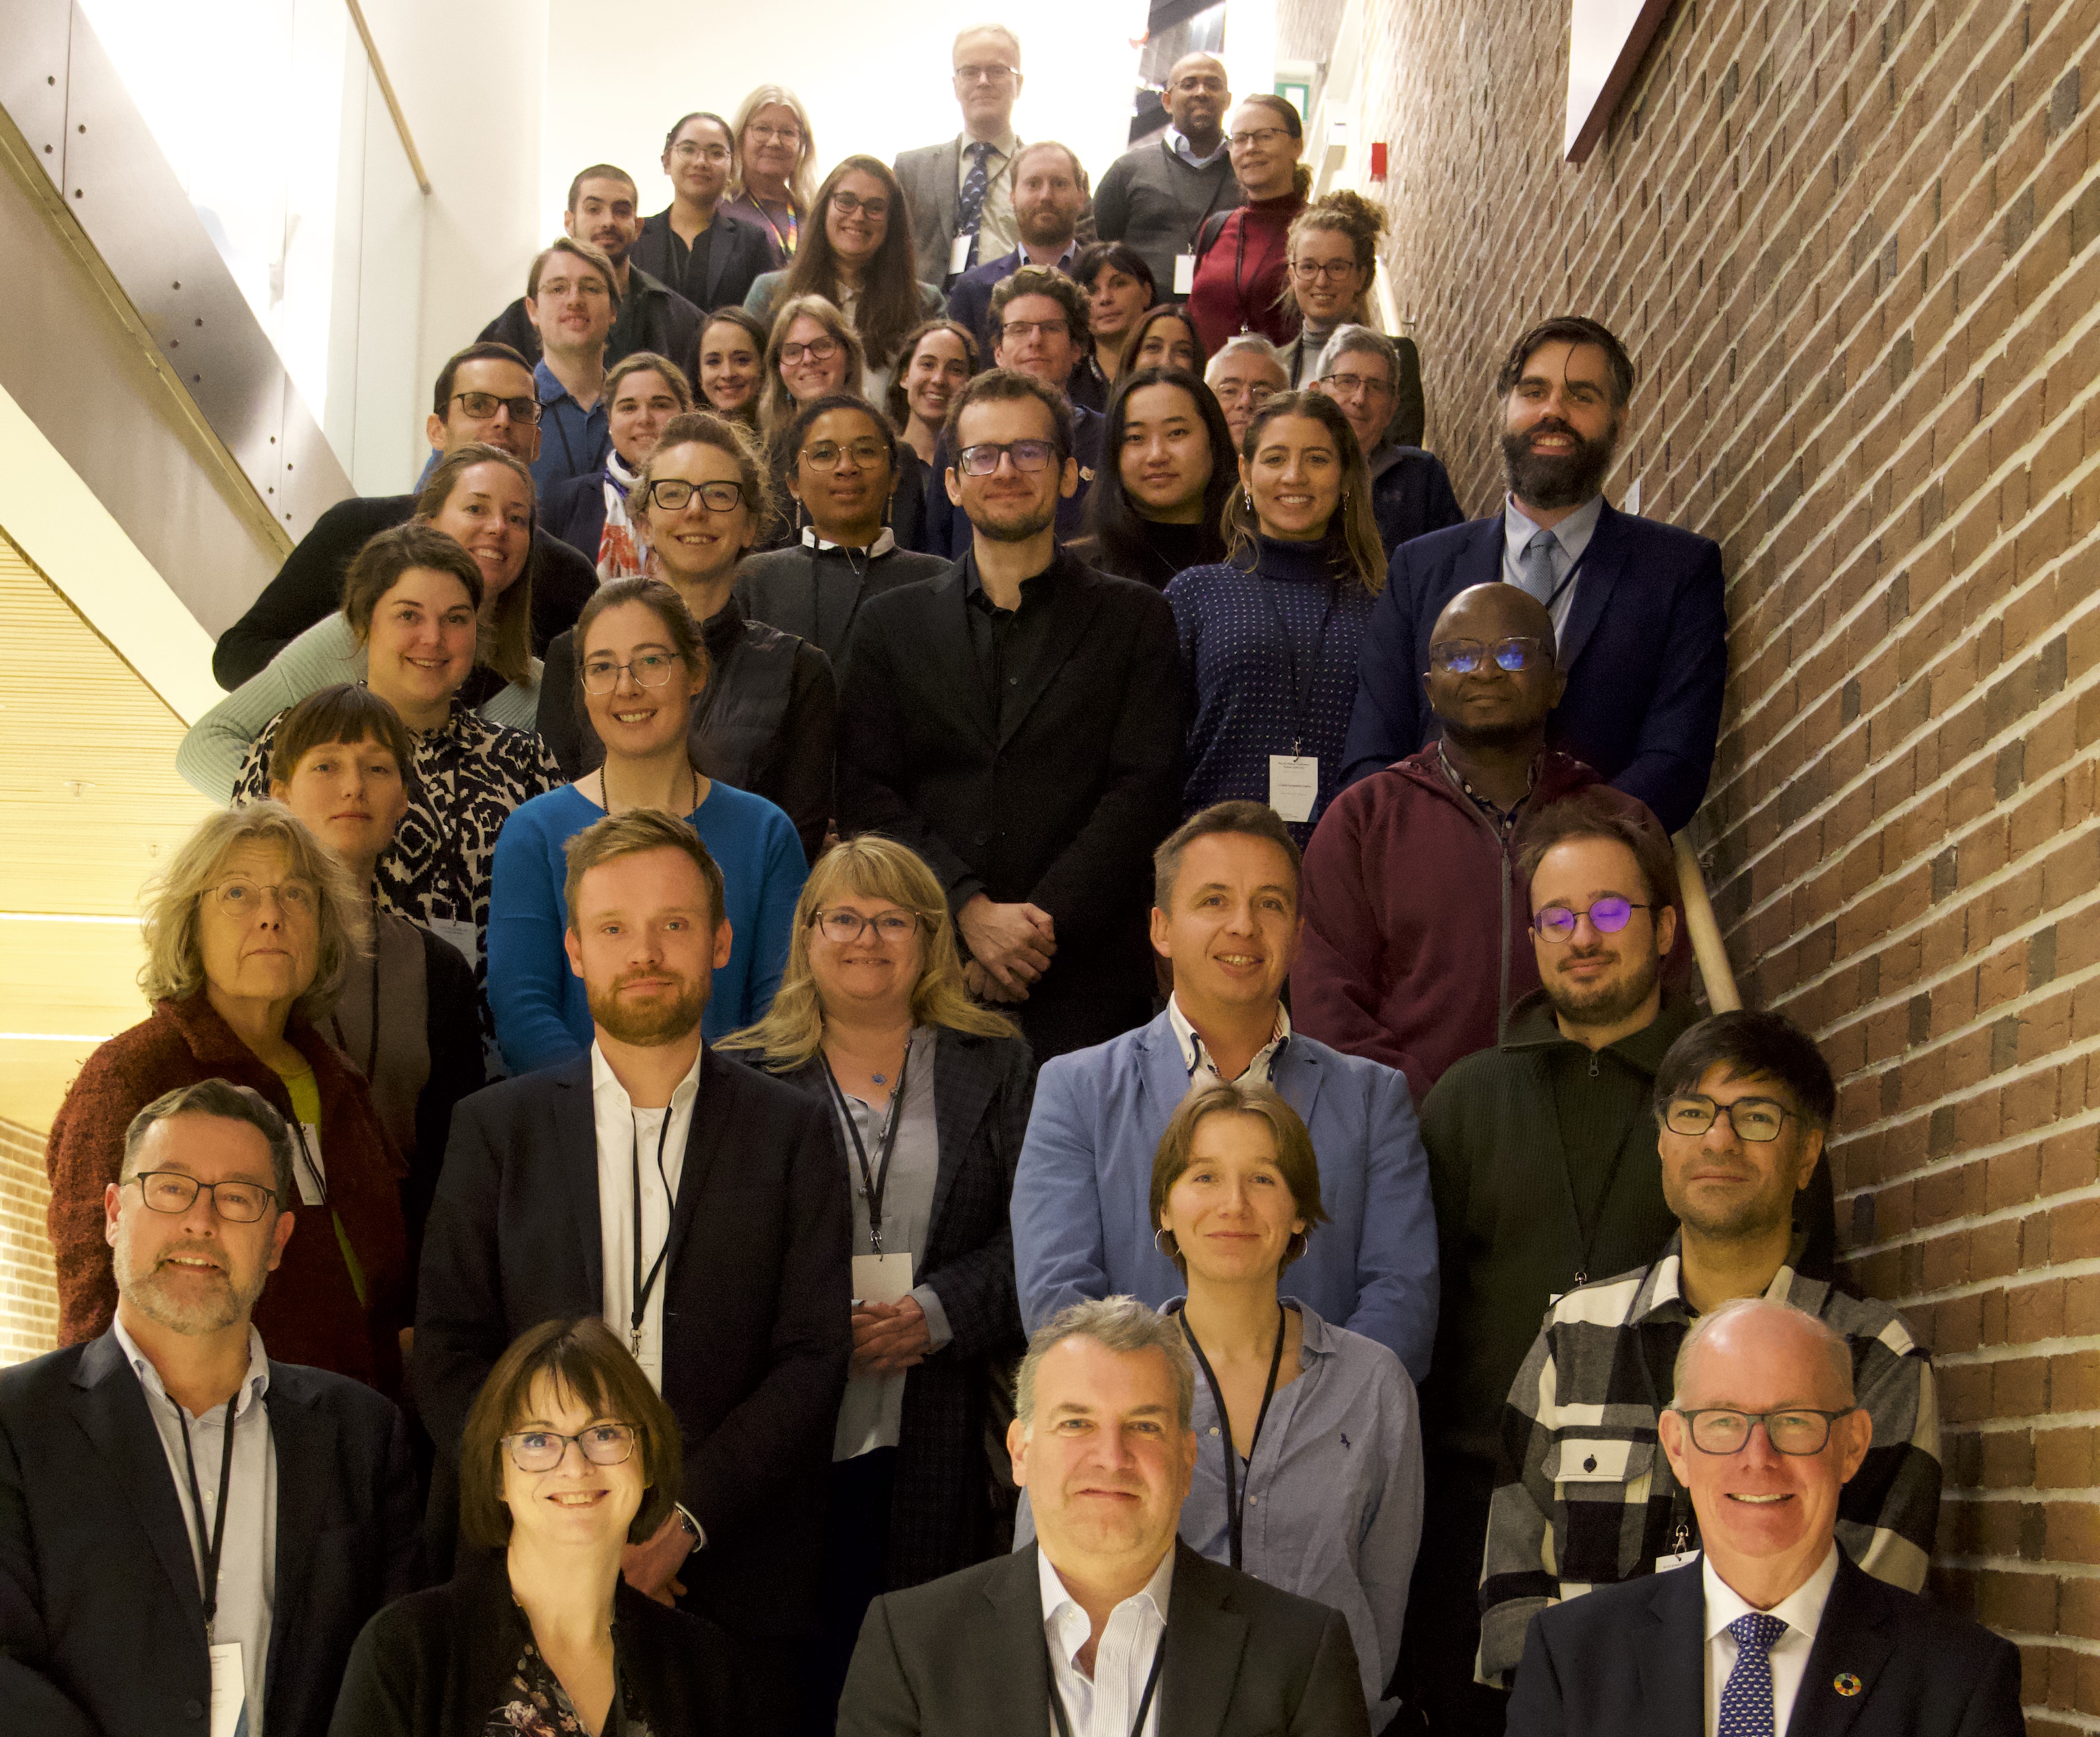 A picture of everyone attending the conference in a stairway.